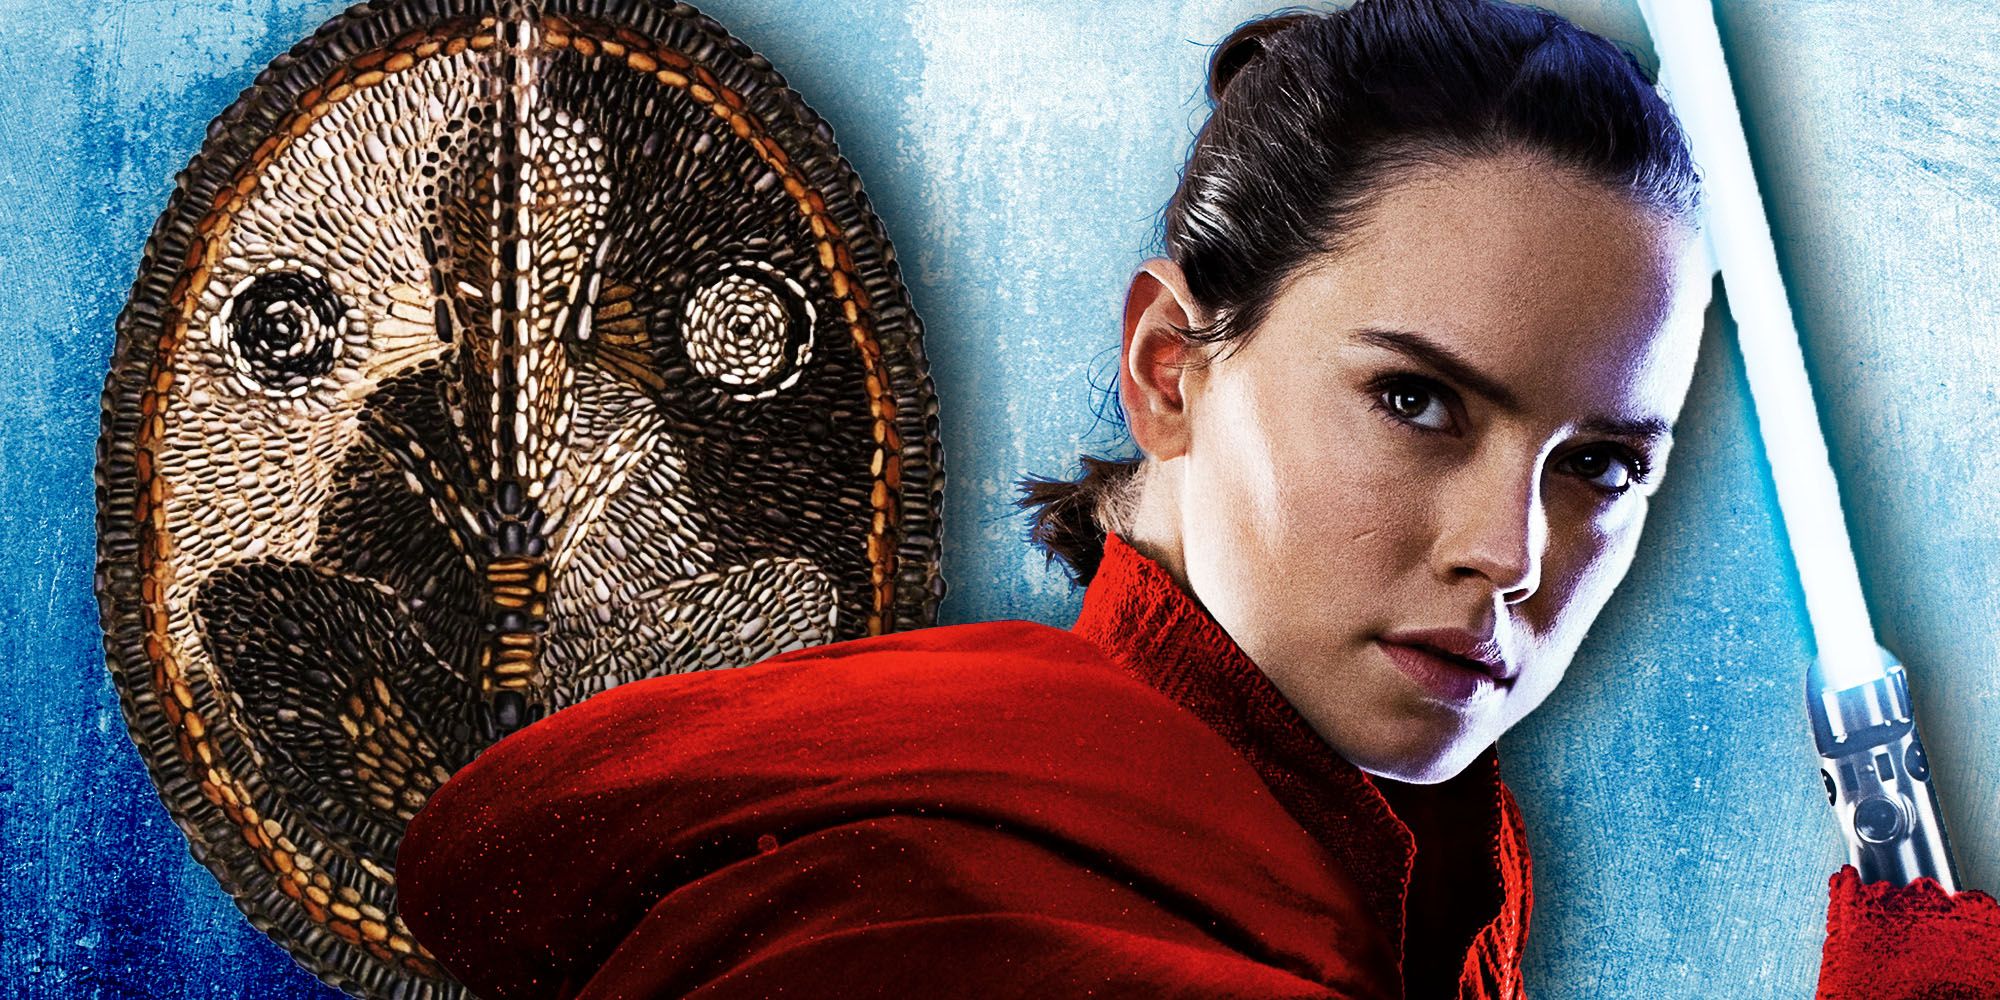 Star Wars Theory Reveals Secret Link Between Rey & The First Jedi Ahead Of New Jedi Order Movies